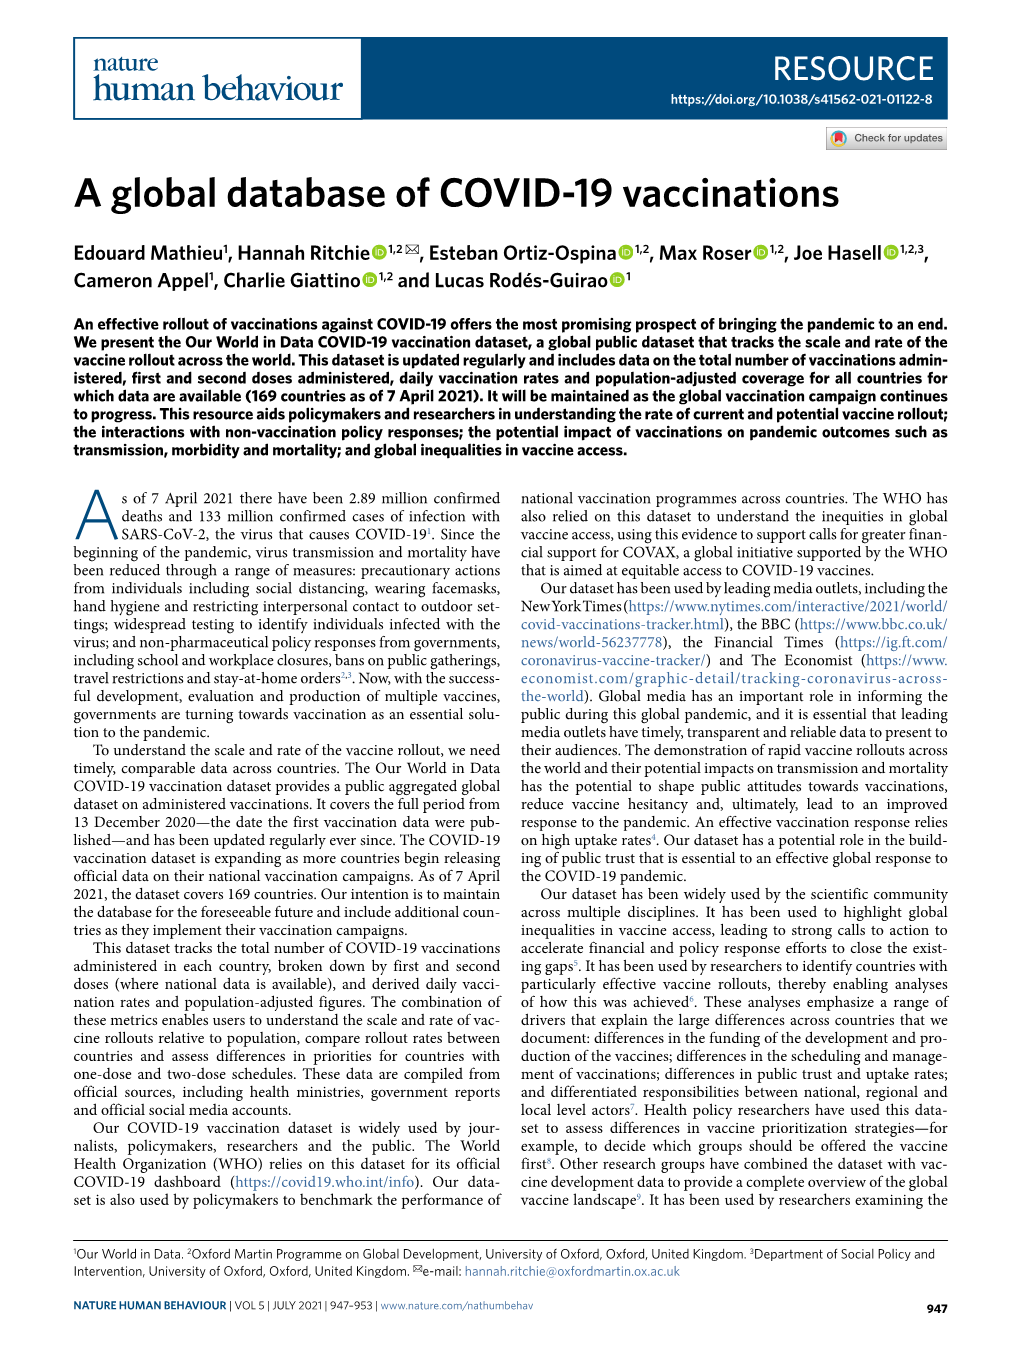 A Global Database of COVID-19 Vaccinations